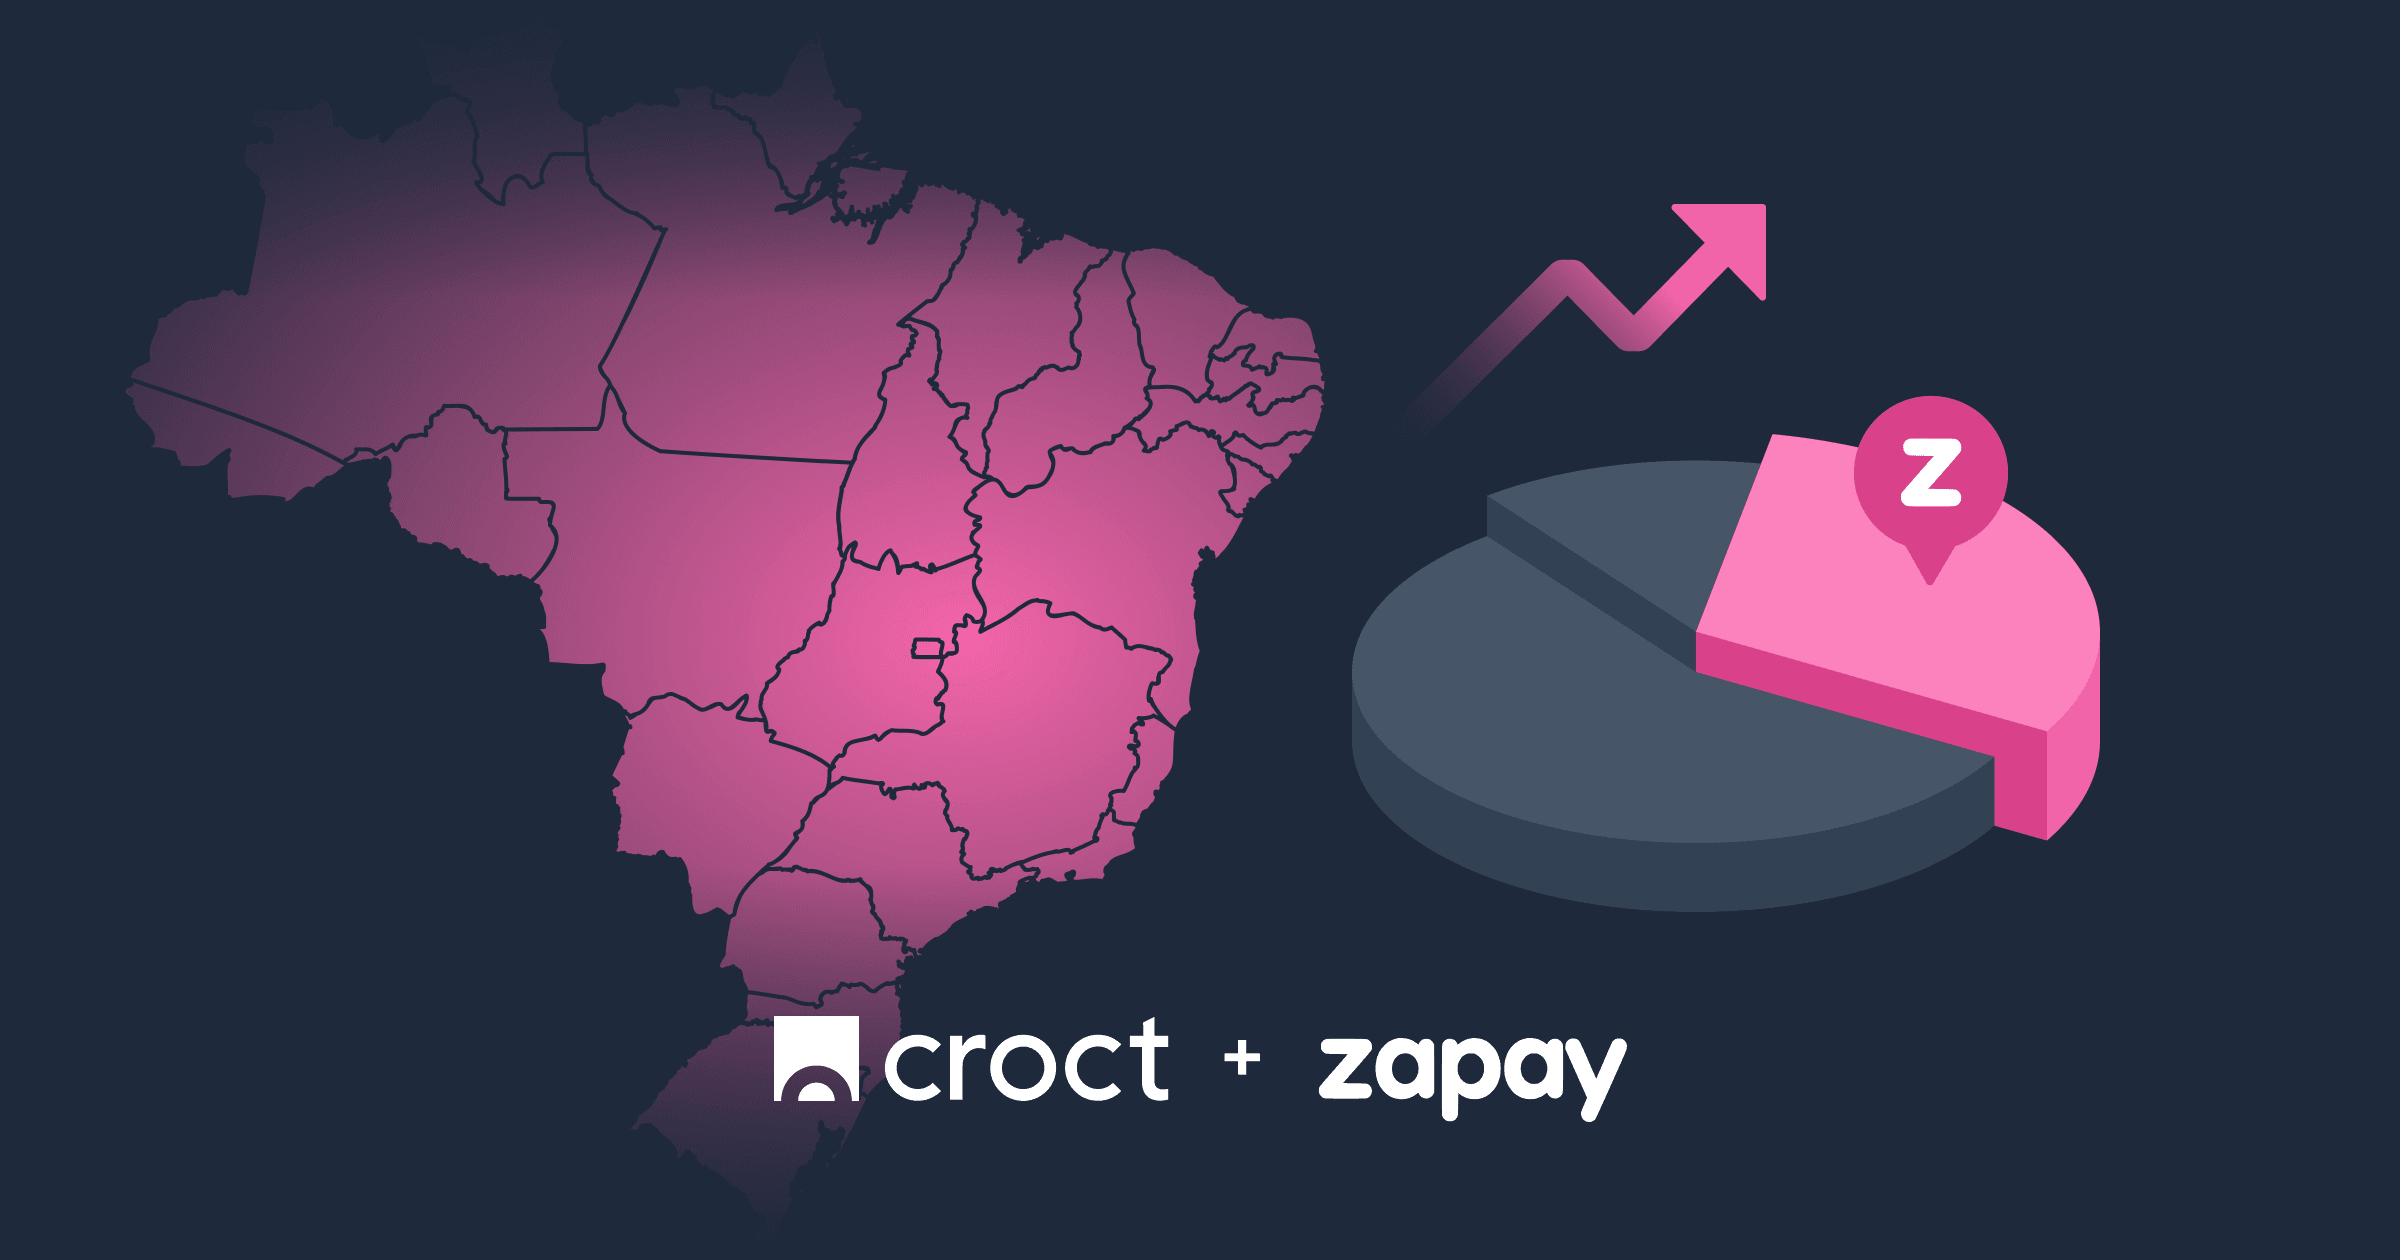 A pink map from Brazil showing its different states and a pie graph representing Zapay's market share after using personalization.